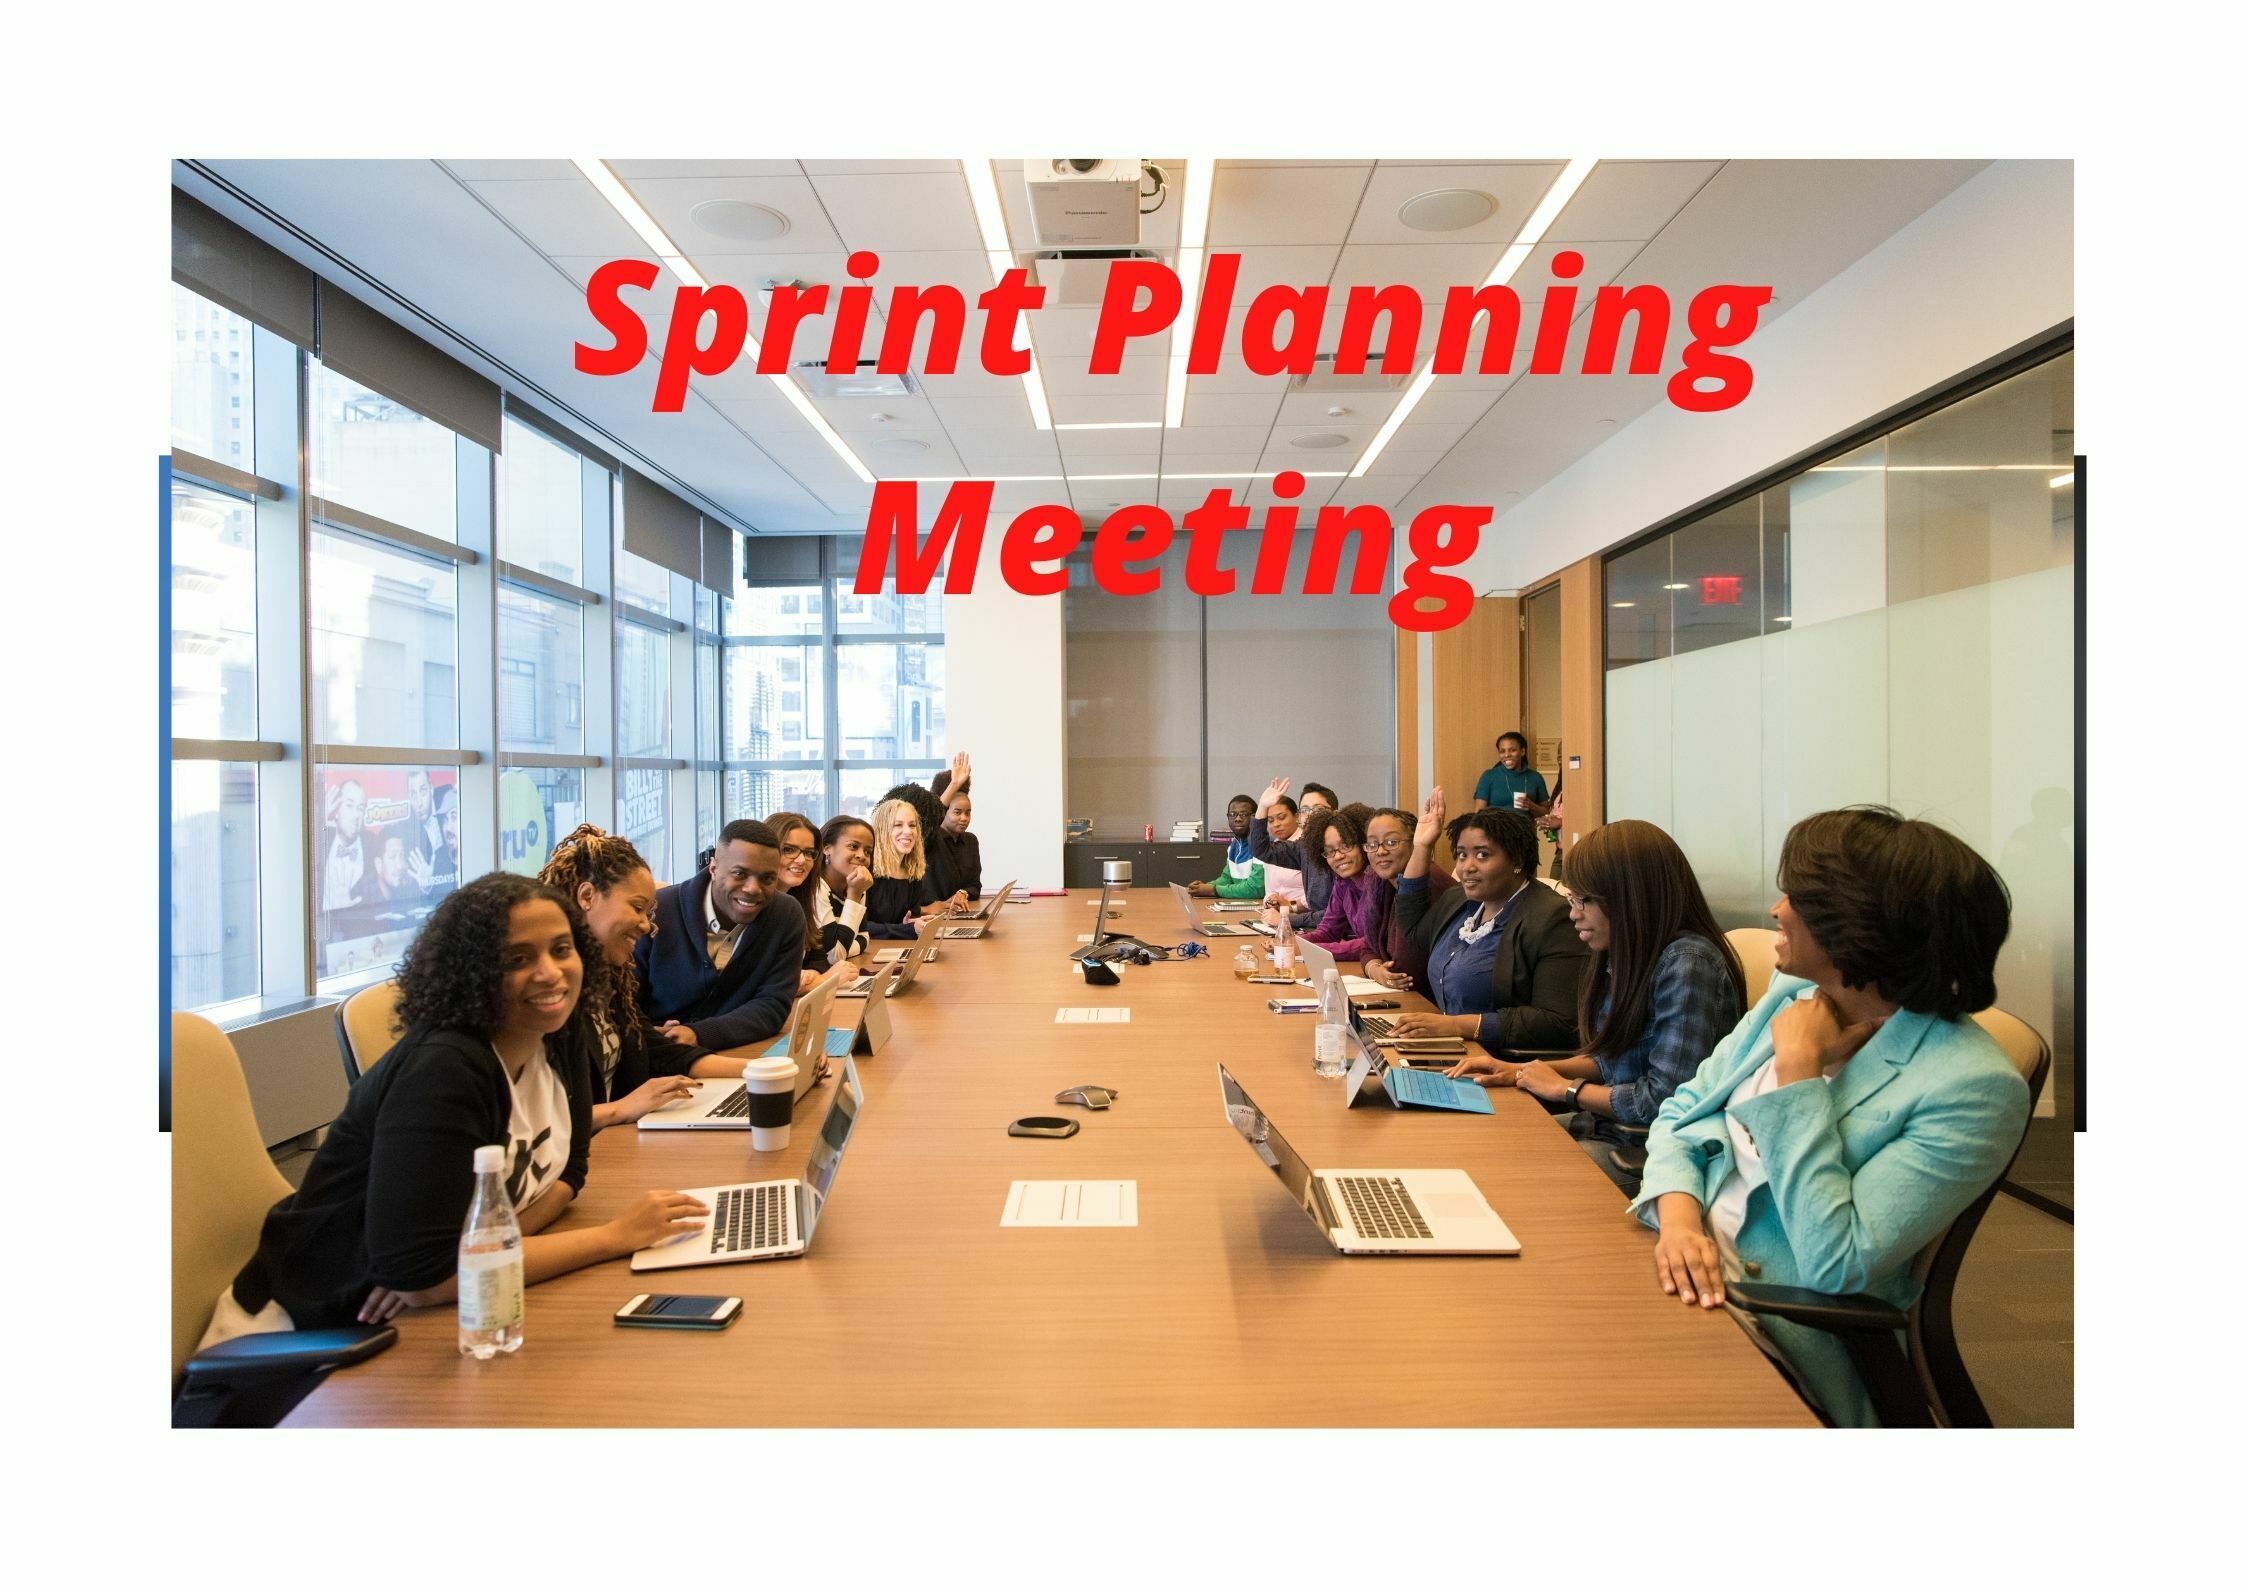 Issue of type “Sprint Planning Meeting”. Other issue types are